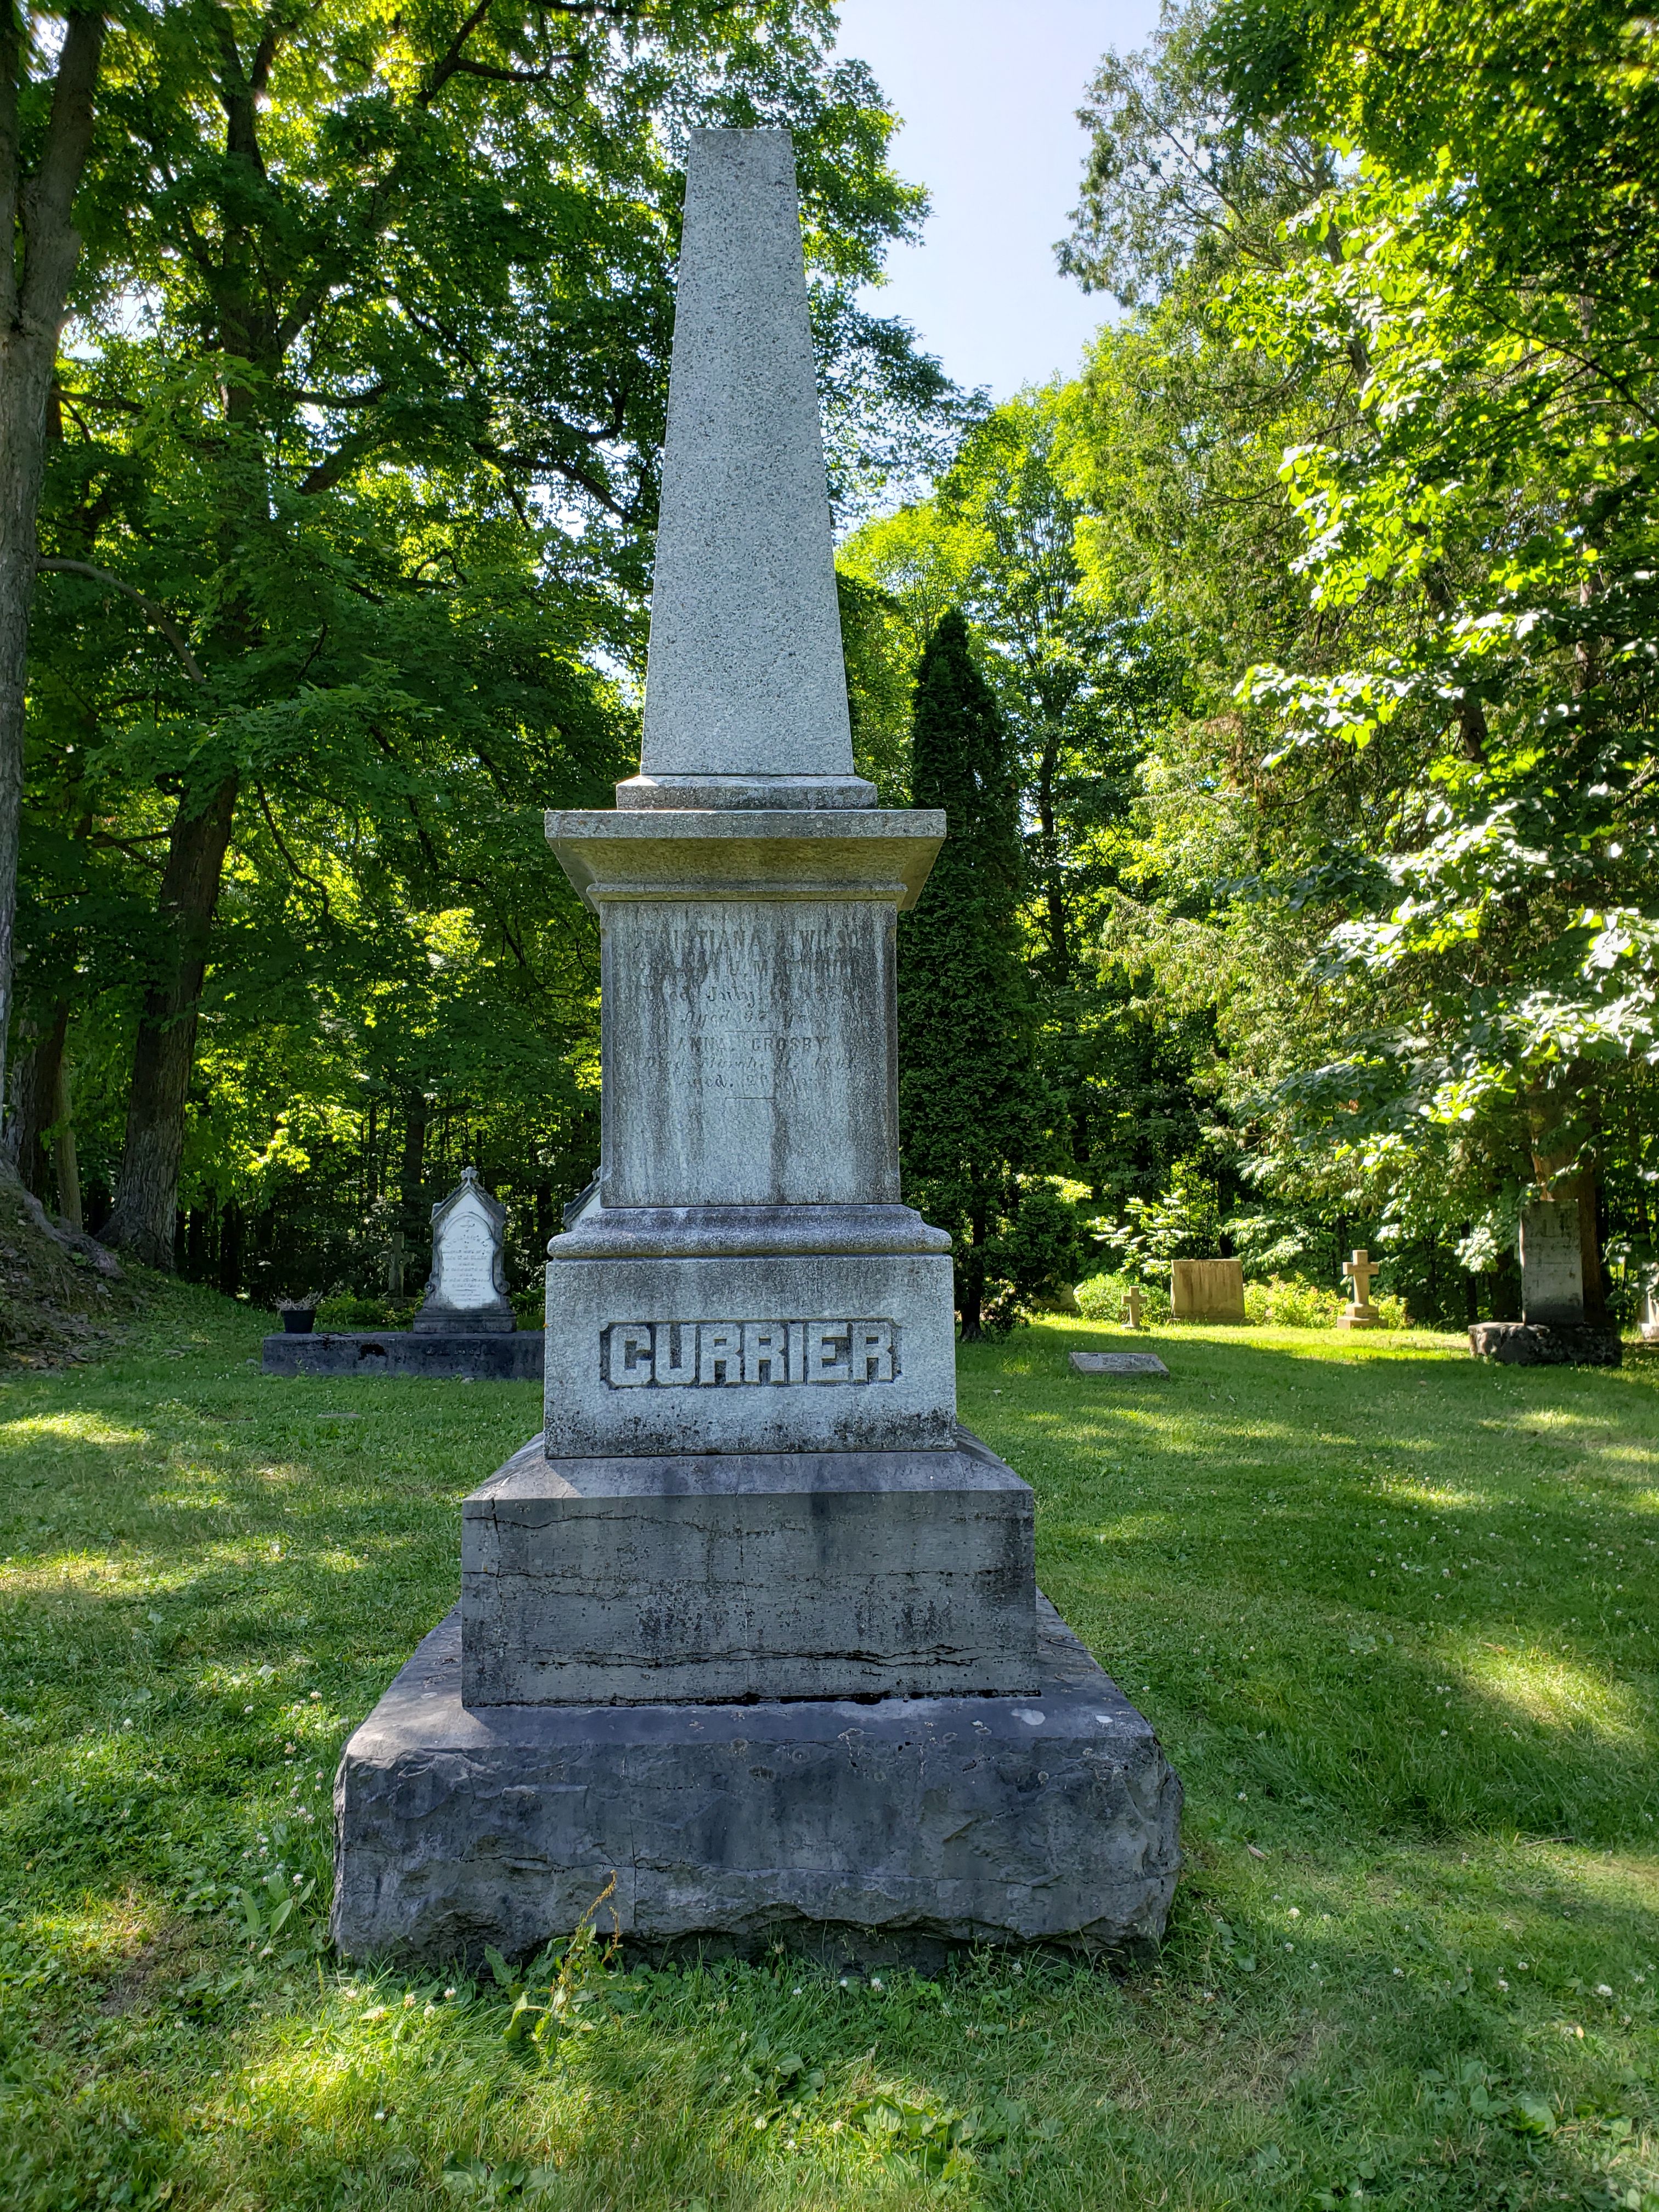 Currier monument